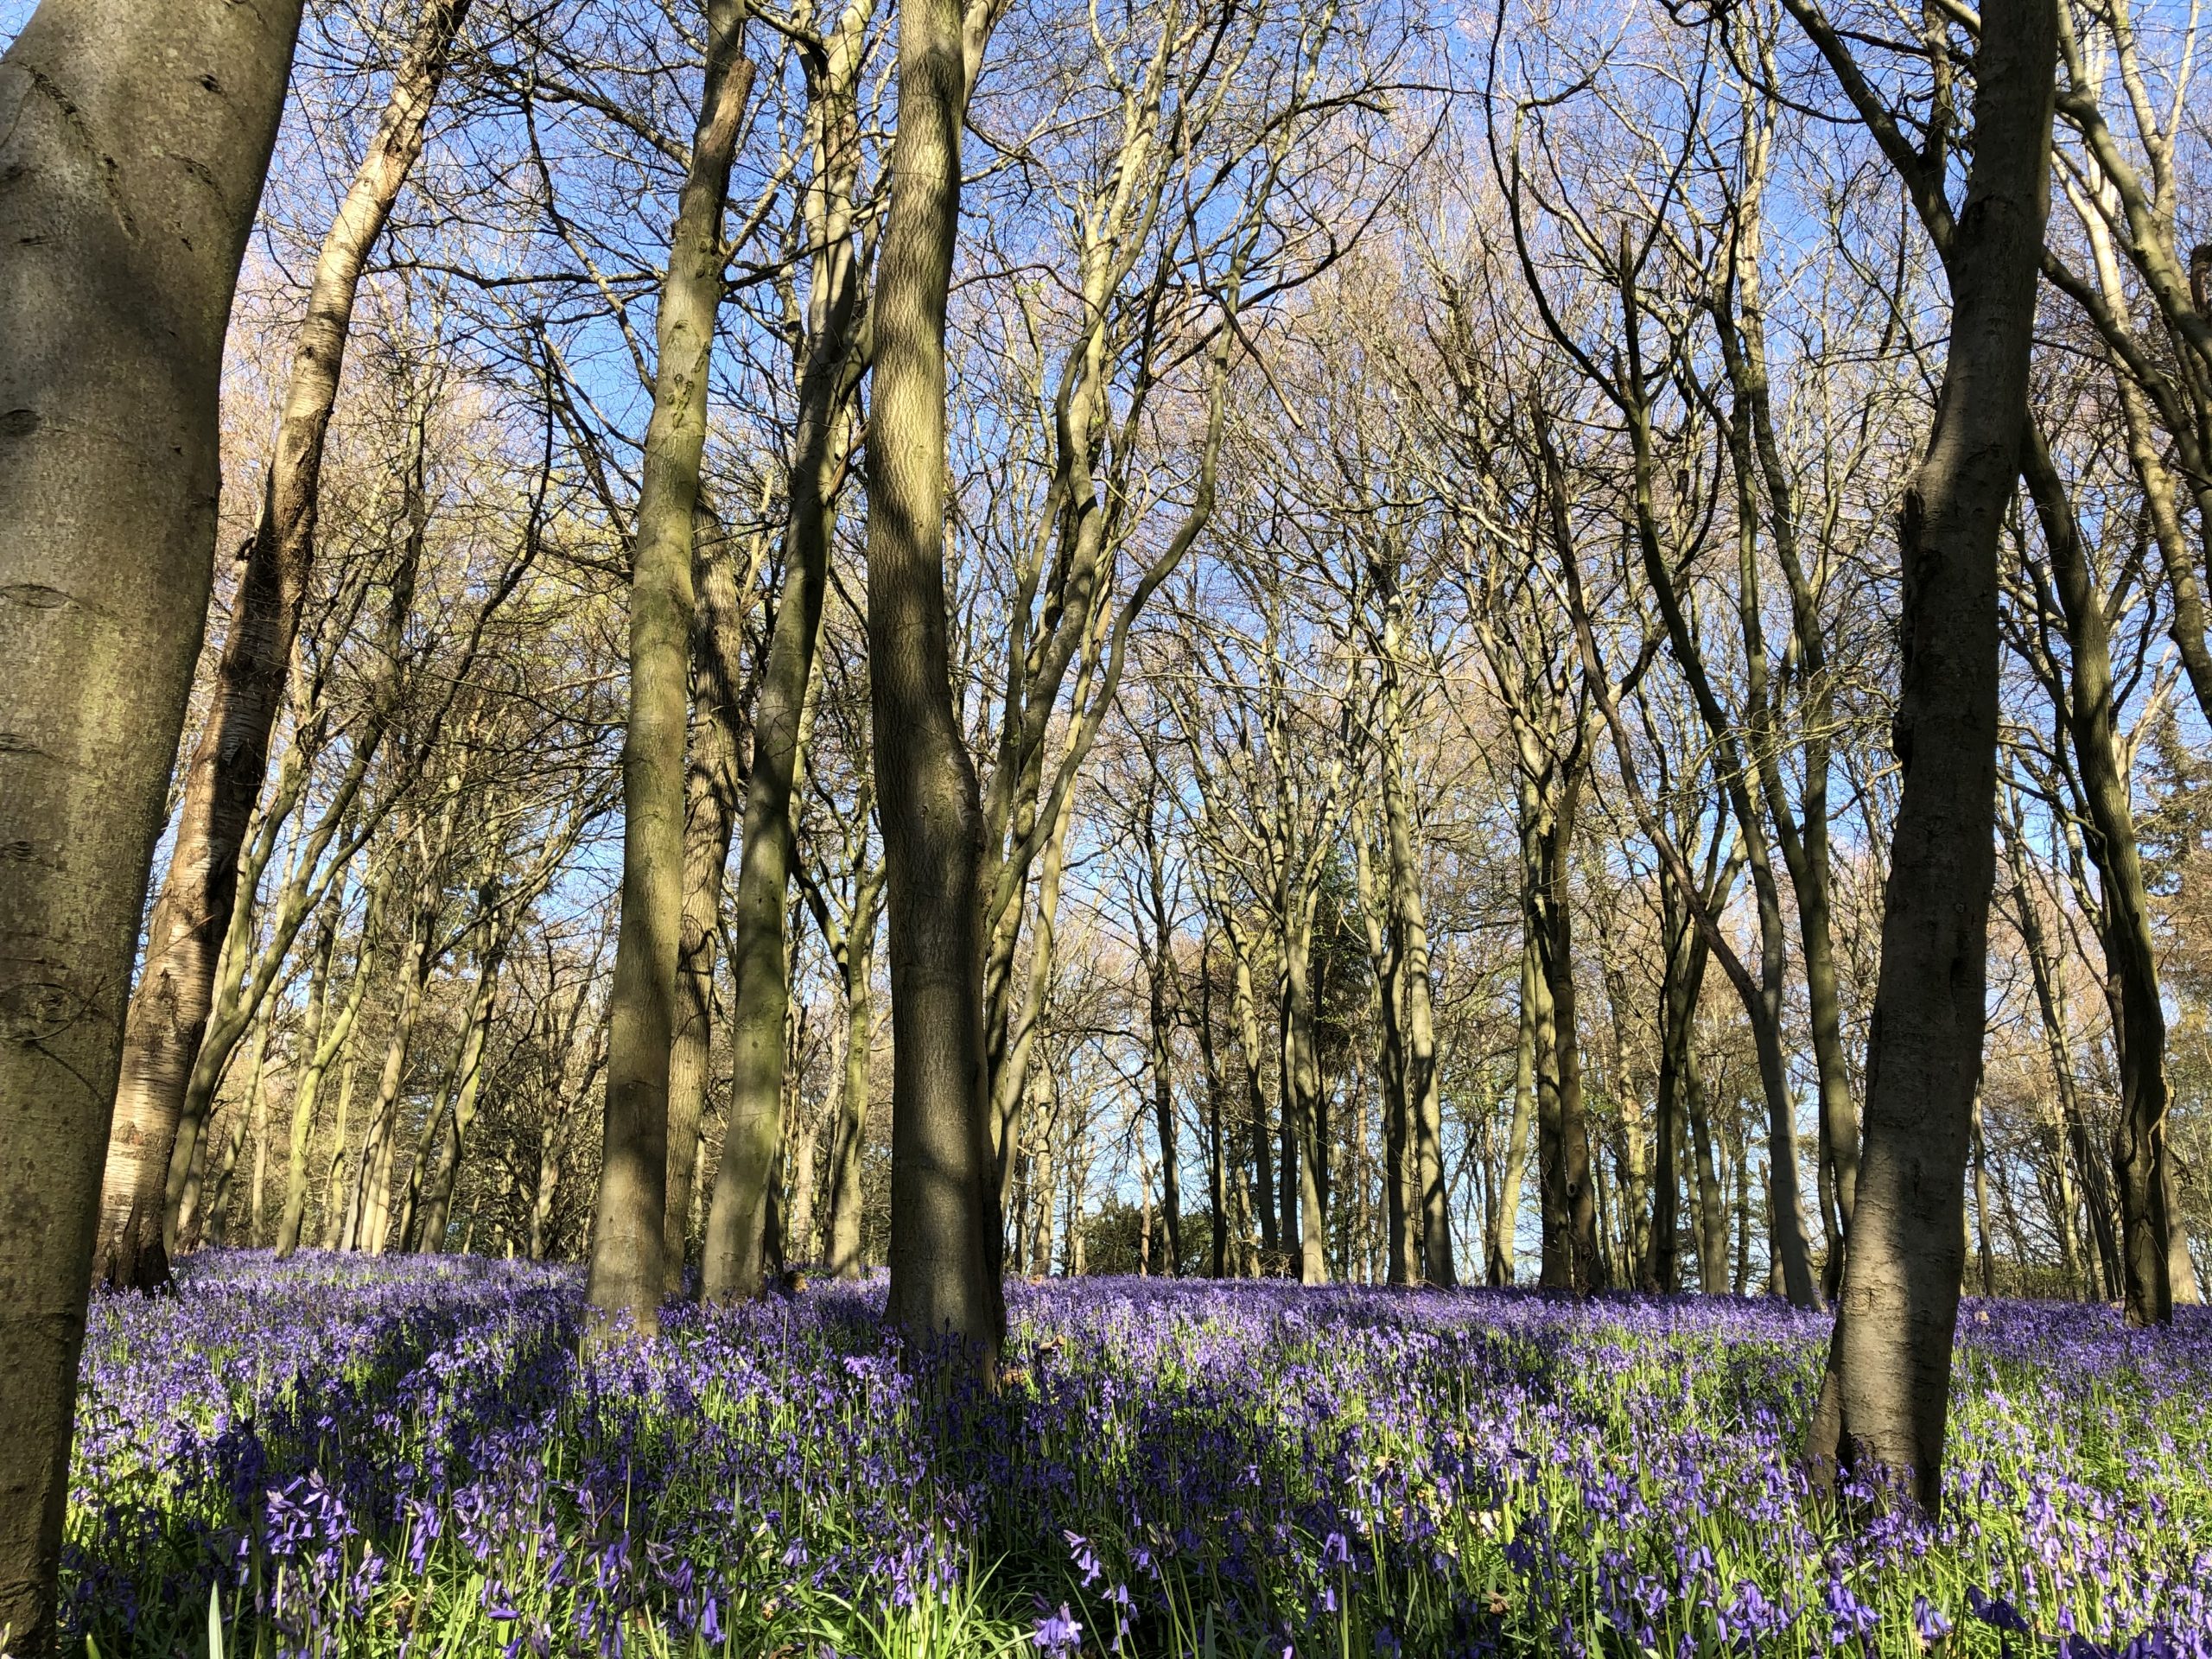 Bluebells on ground with trees above